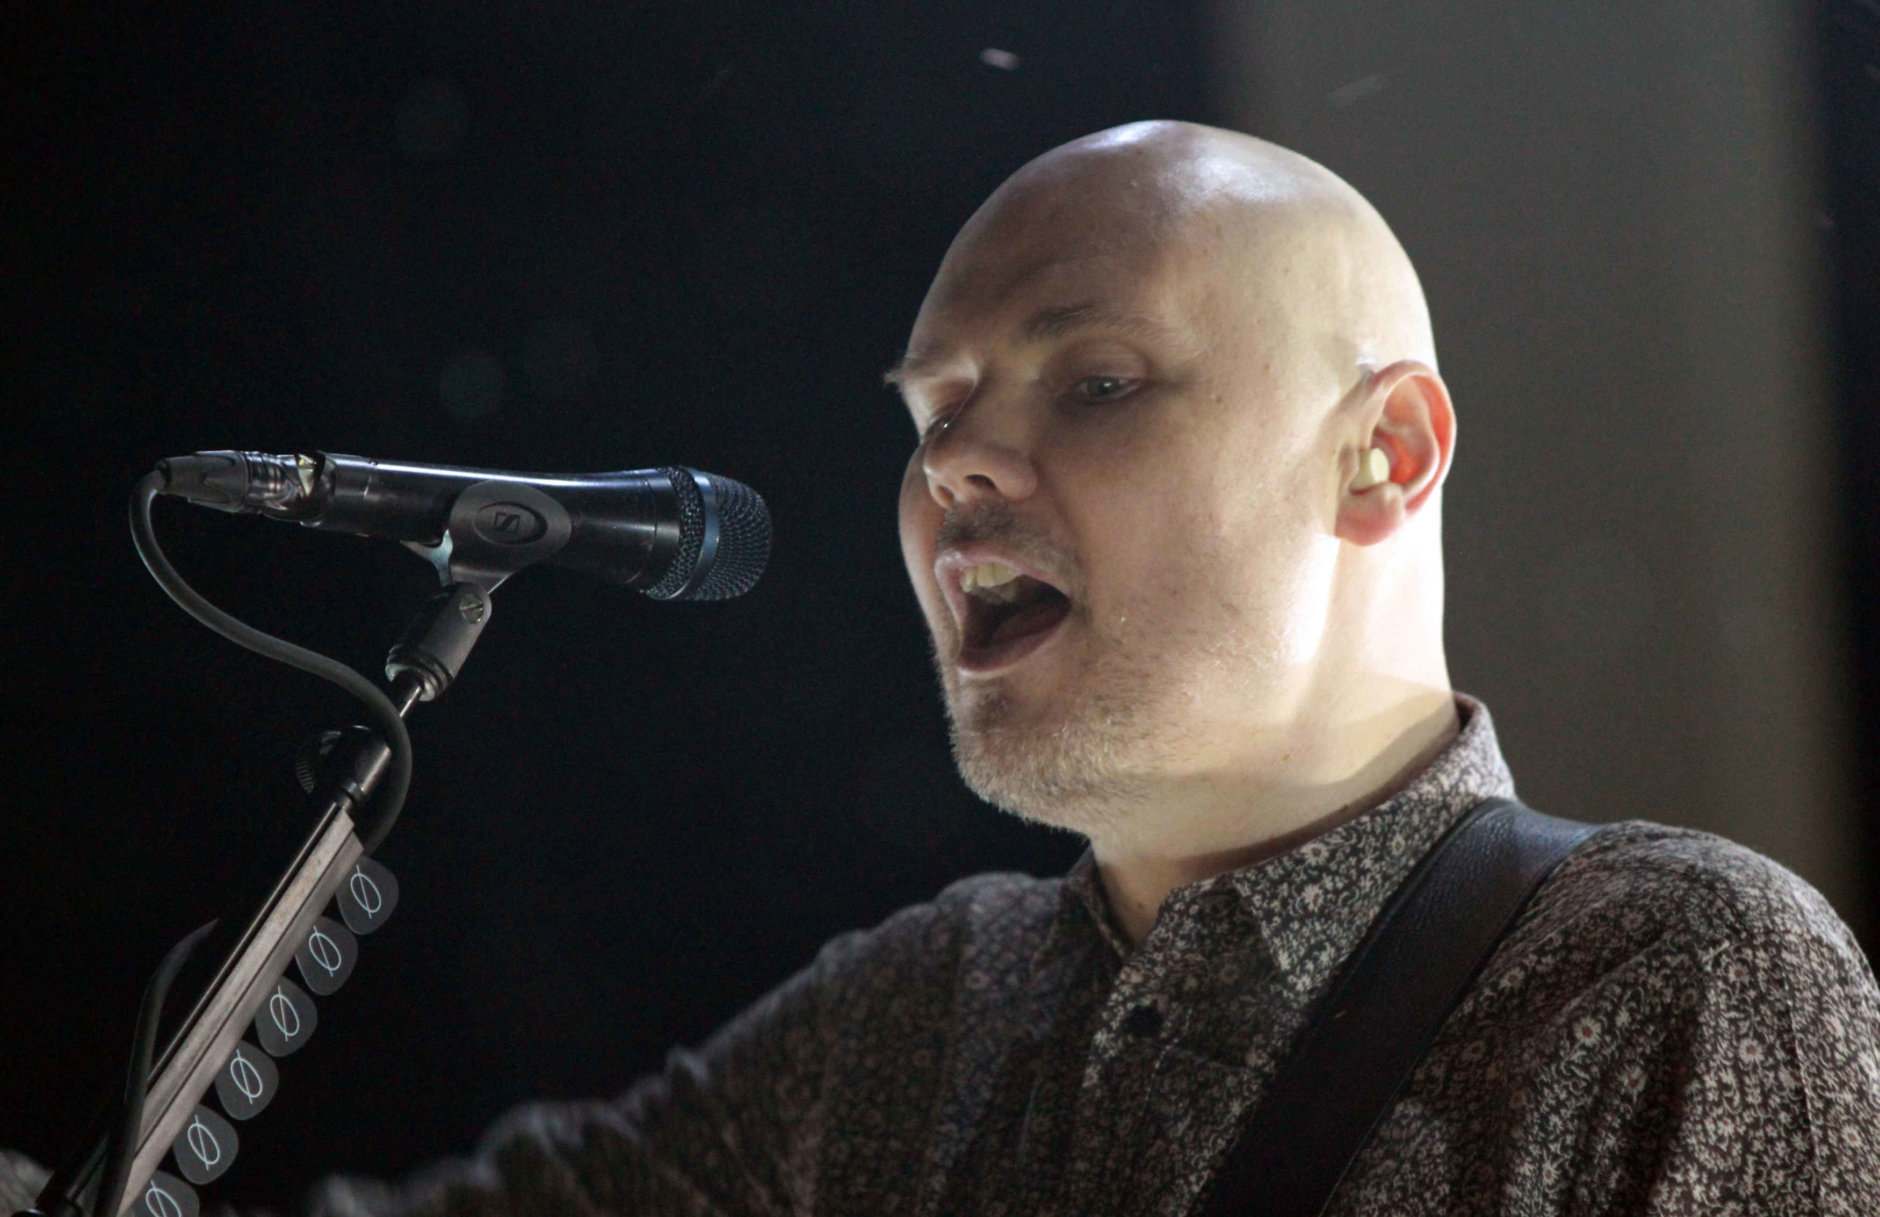 Billy Corgan with The Smashing Pumpkins performs during The Smashing Pumpkins &amp; Marilyn Manson: The End Times Tour at Aaron's Amphitheatre on Saturday, July 25, 2015, in Atlanta. (Photo by Robb D. Cohen/Invision/AP)